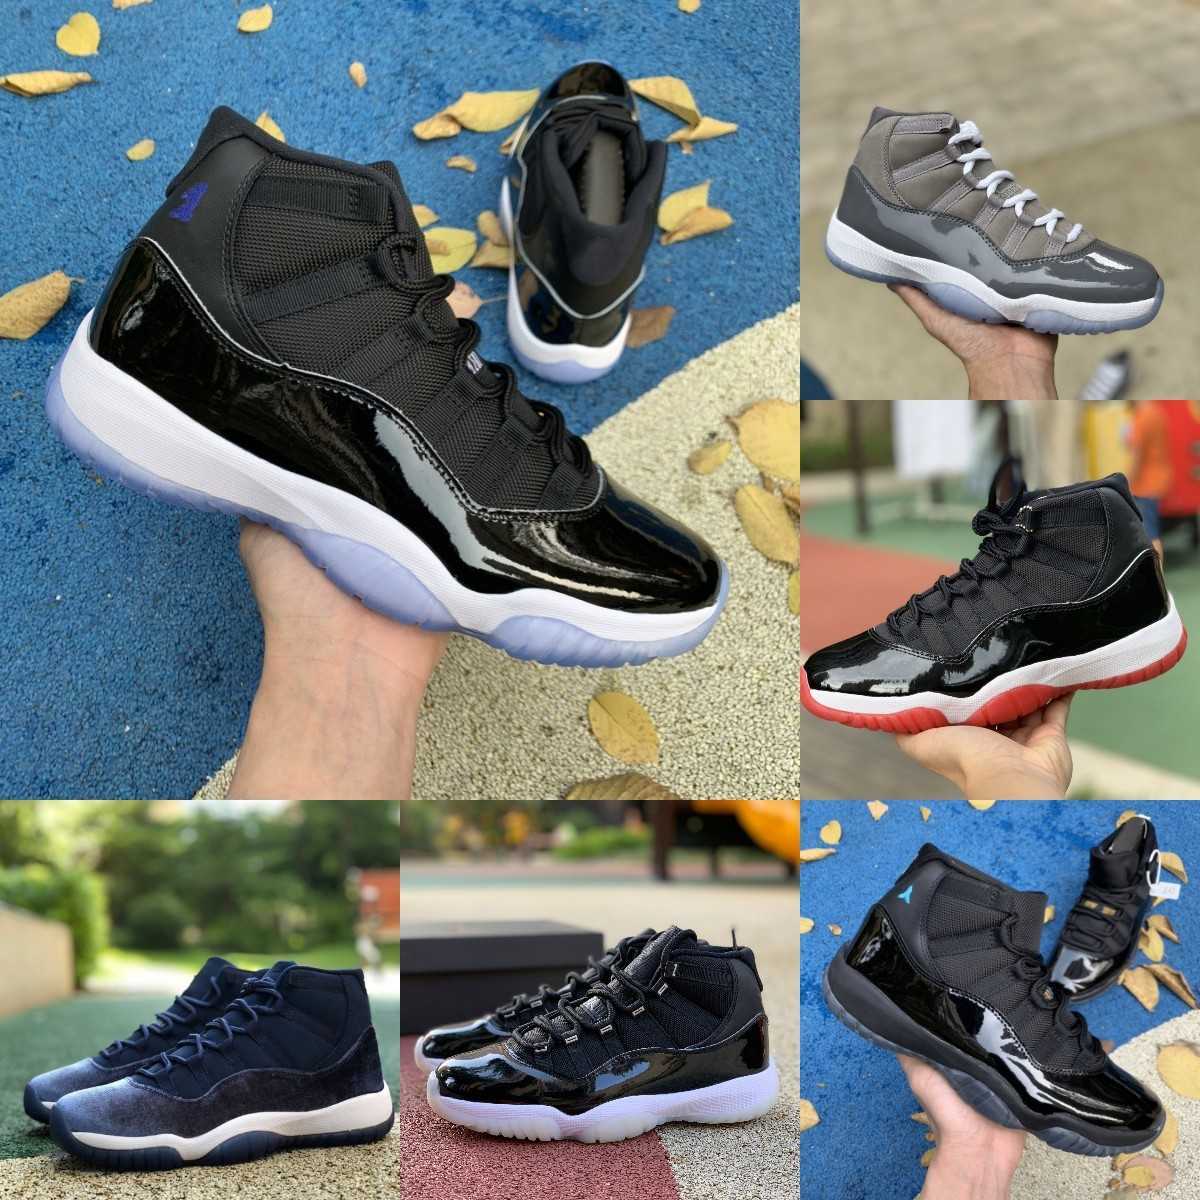 

Jumpman COOL GREY 11 11s High Basketball Shoes Jubilee Legend Blue Midnight Navy Playoffs Bred Space Jam Gamma Blue Concord 45 Low Columbia Trainer Designer Sneakers, Please contact us